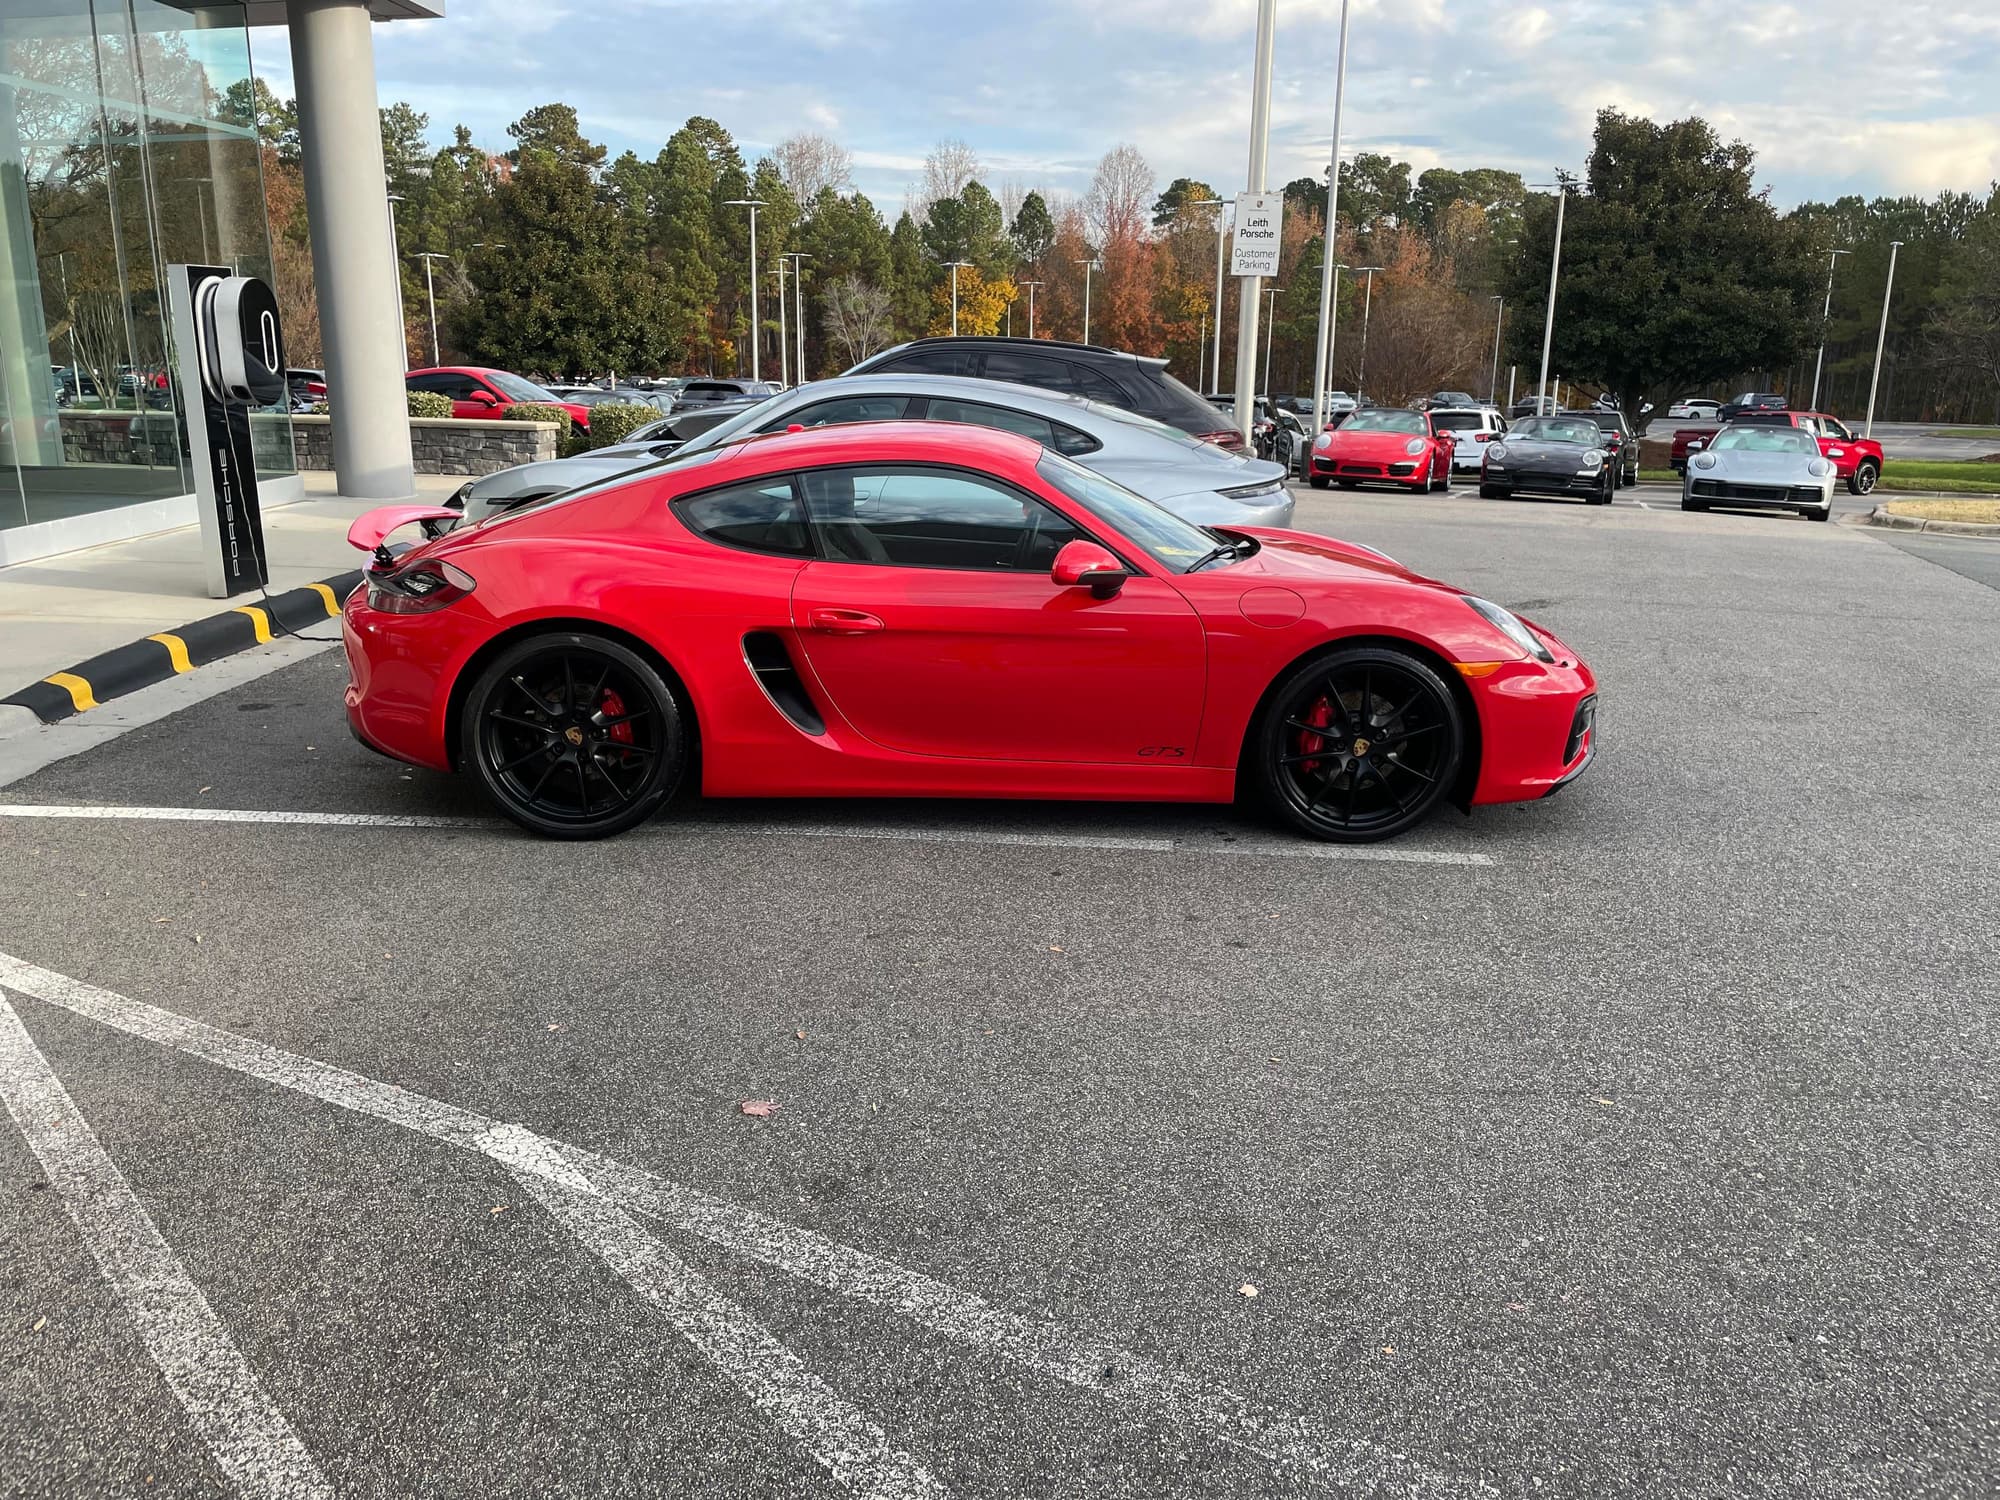 2015 Porsche Cayman - Certified Cayman GTS - Used - VIN WP0AB2A82FK182957 - 17,869 Miles - 6 cyl - 2WD - Manual - Coupe - Red - Pittsburgh, PA 15215, United States